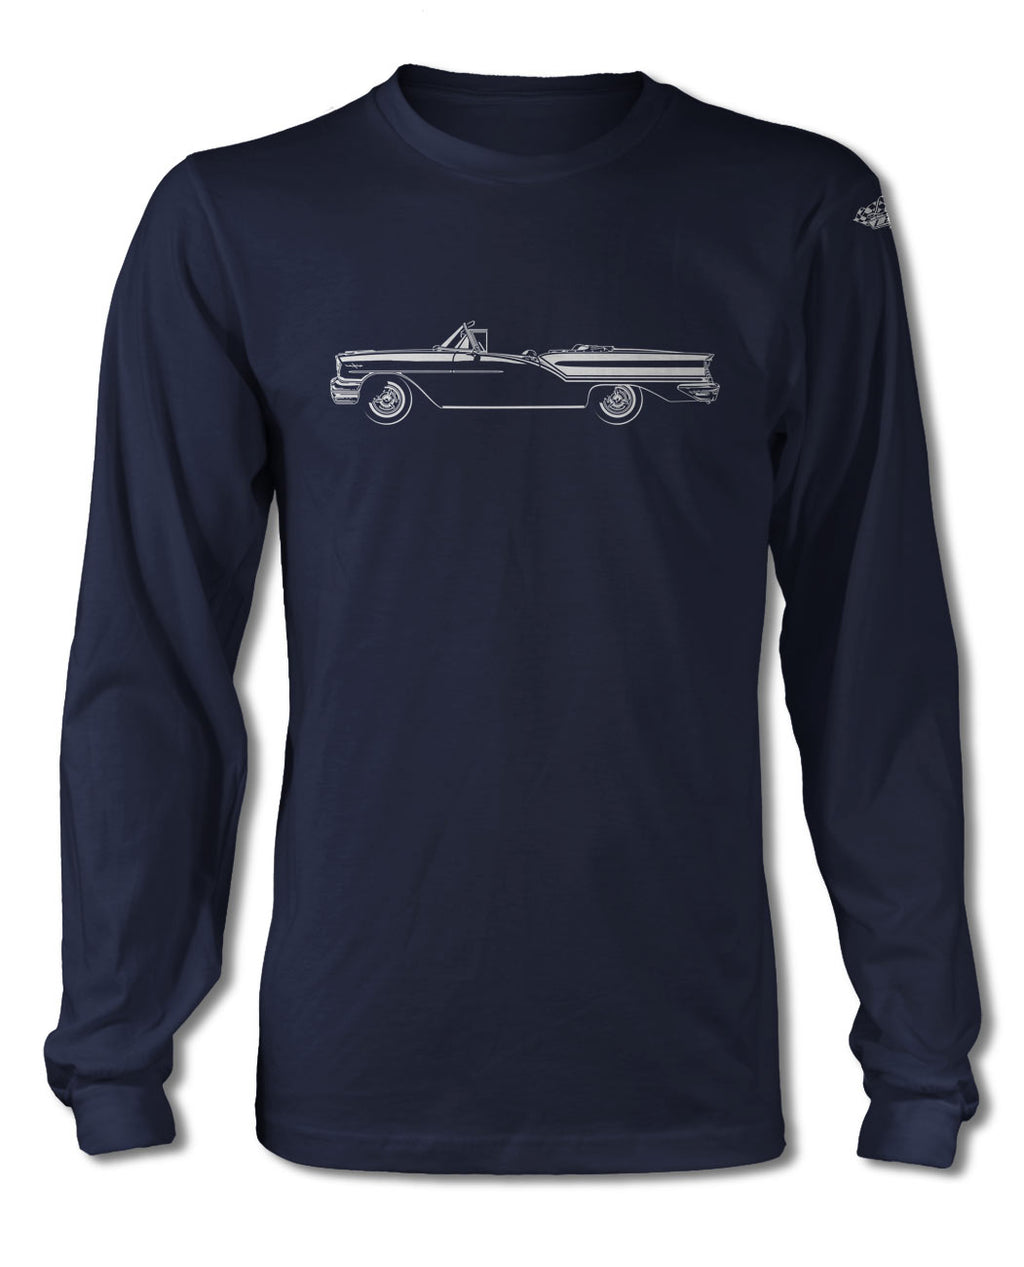 1957 Oldsmobile 98 Starfire Convertible T-Shirt - Long Sleeves - Side View